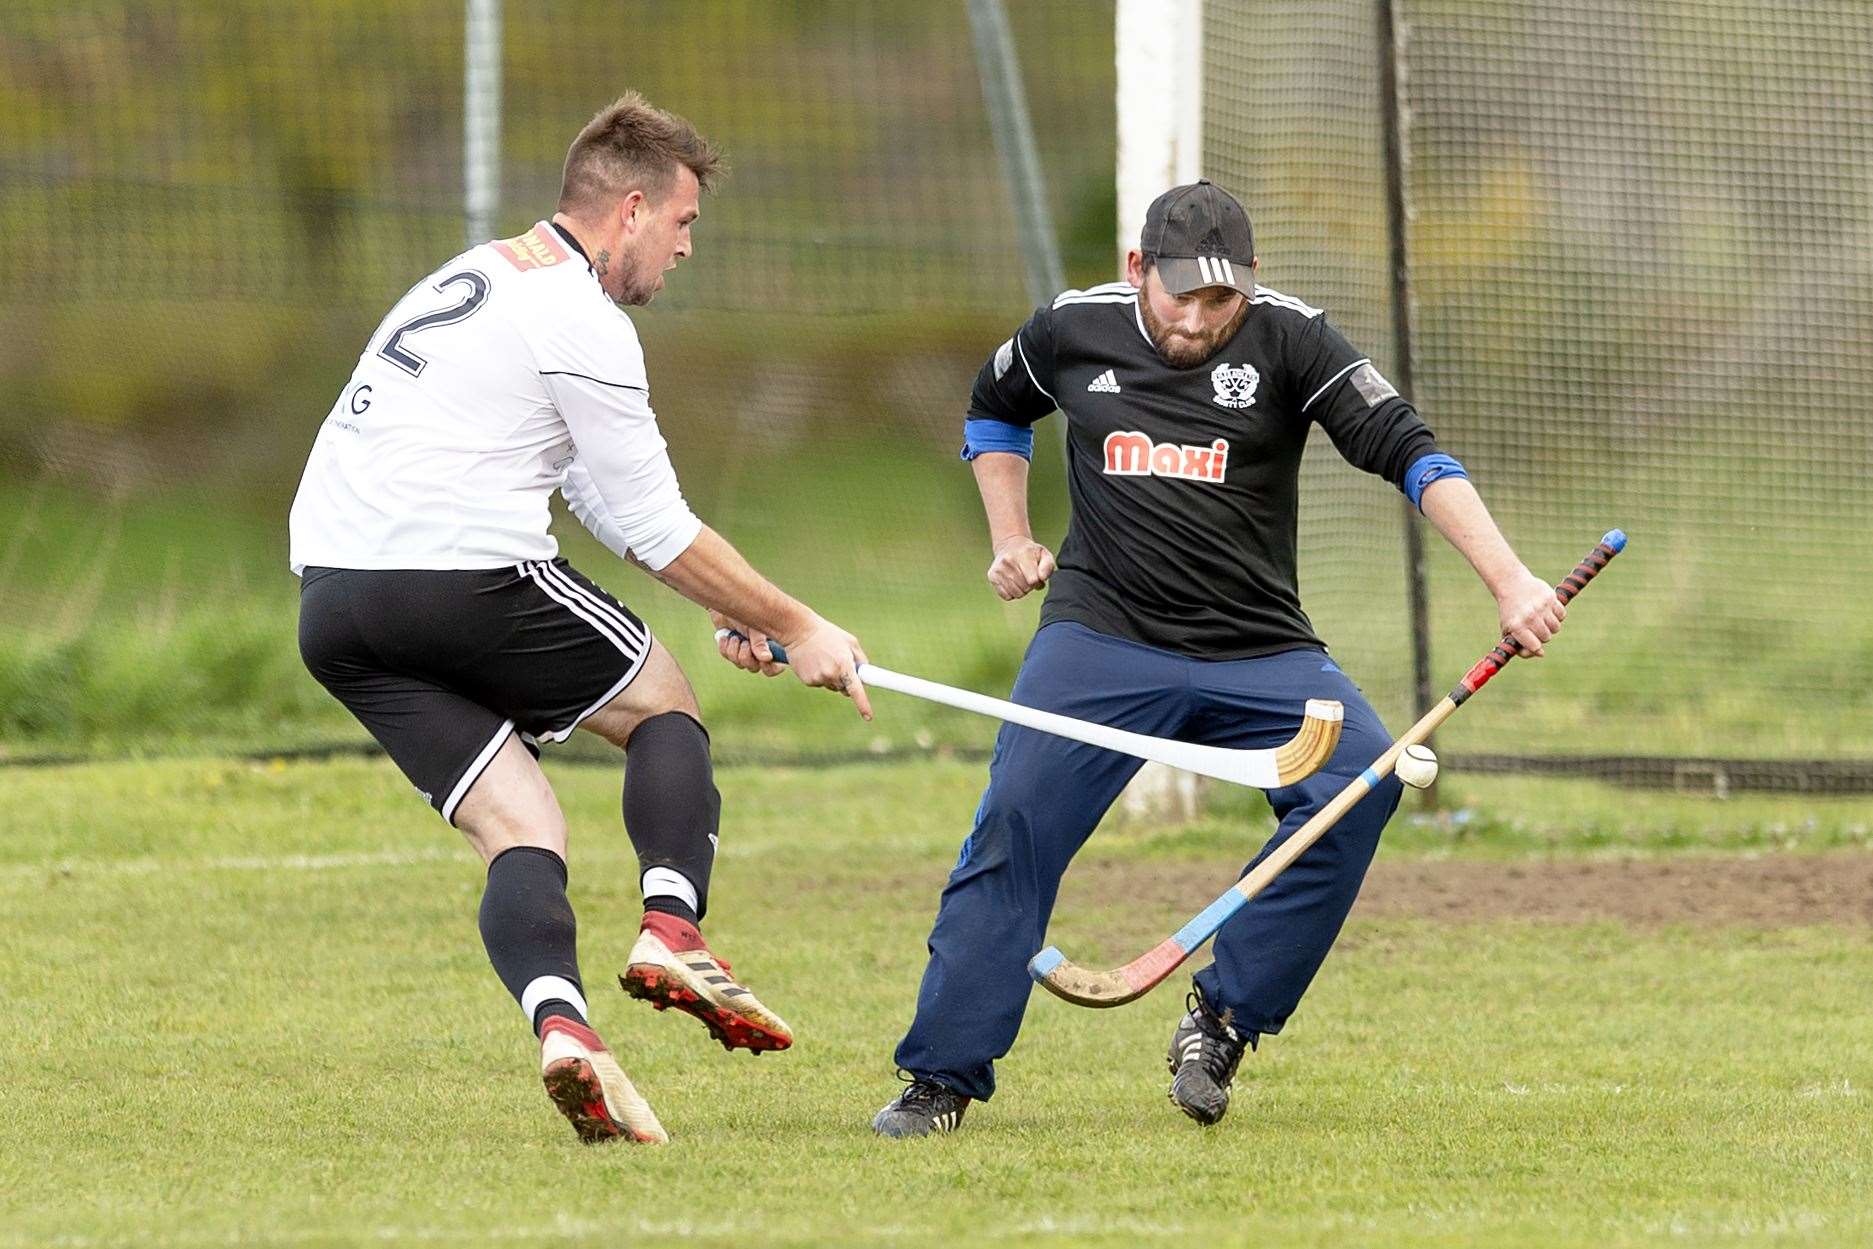 Kyles’ keeper John Whyte stops an attack from Marc MacLachlan (Lovat). Picture: Neil Paterson